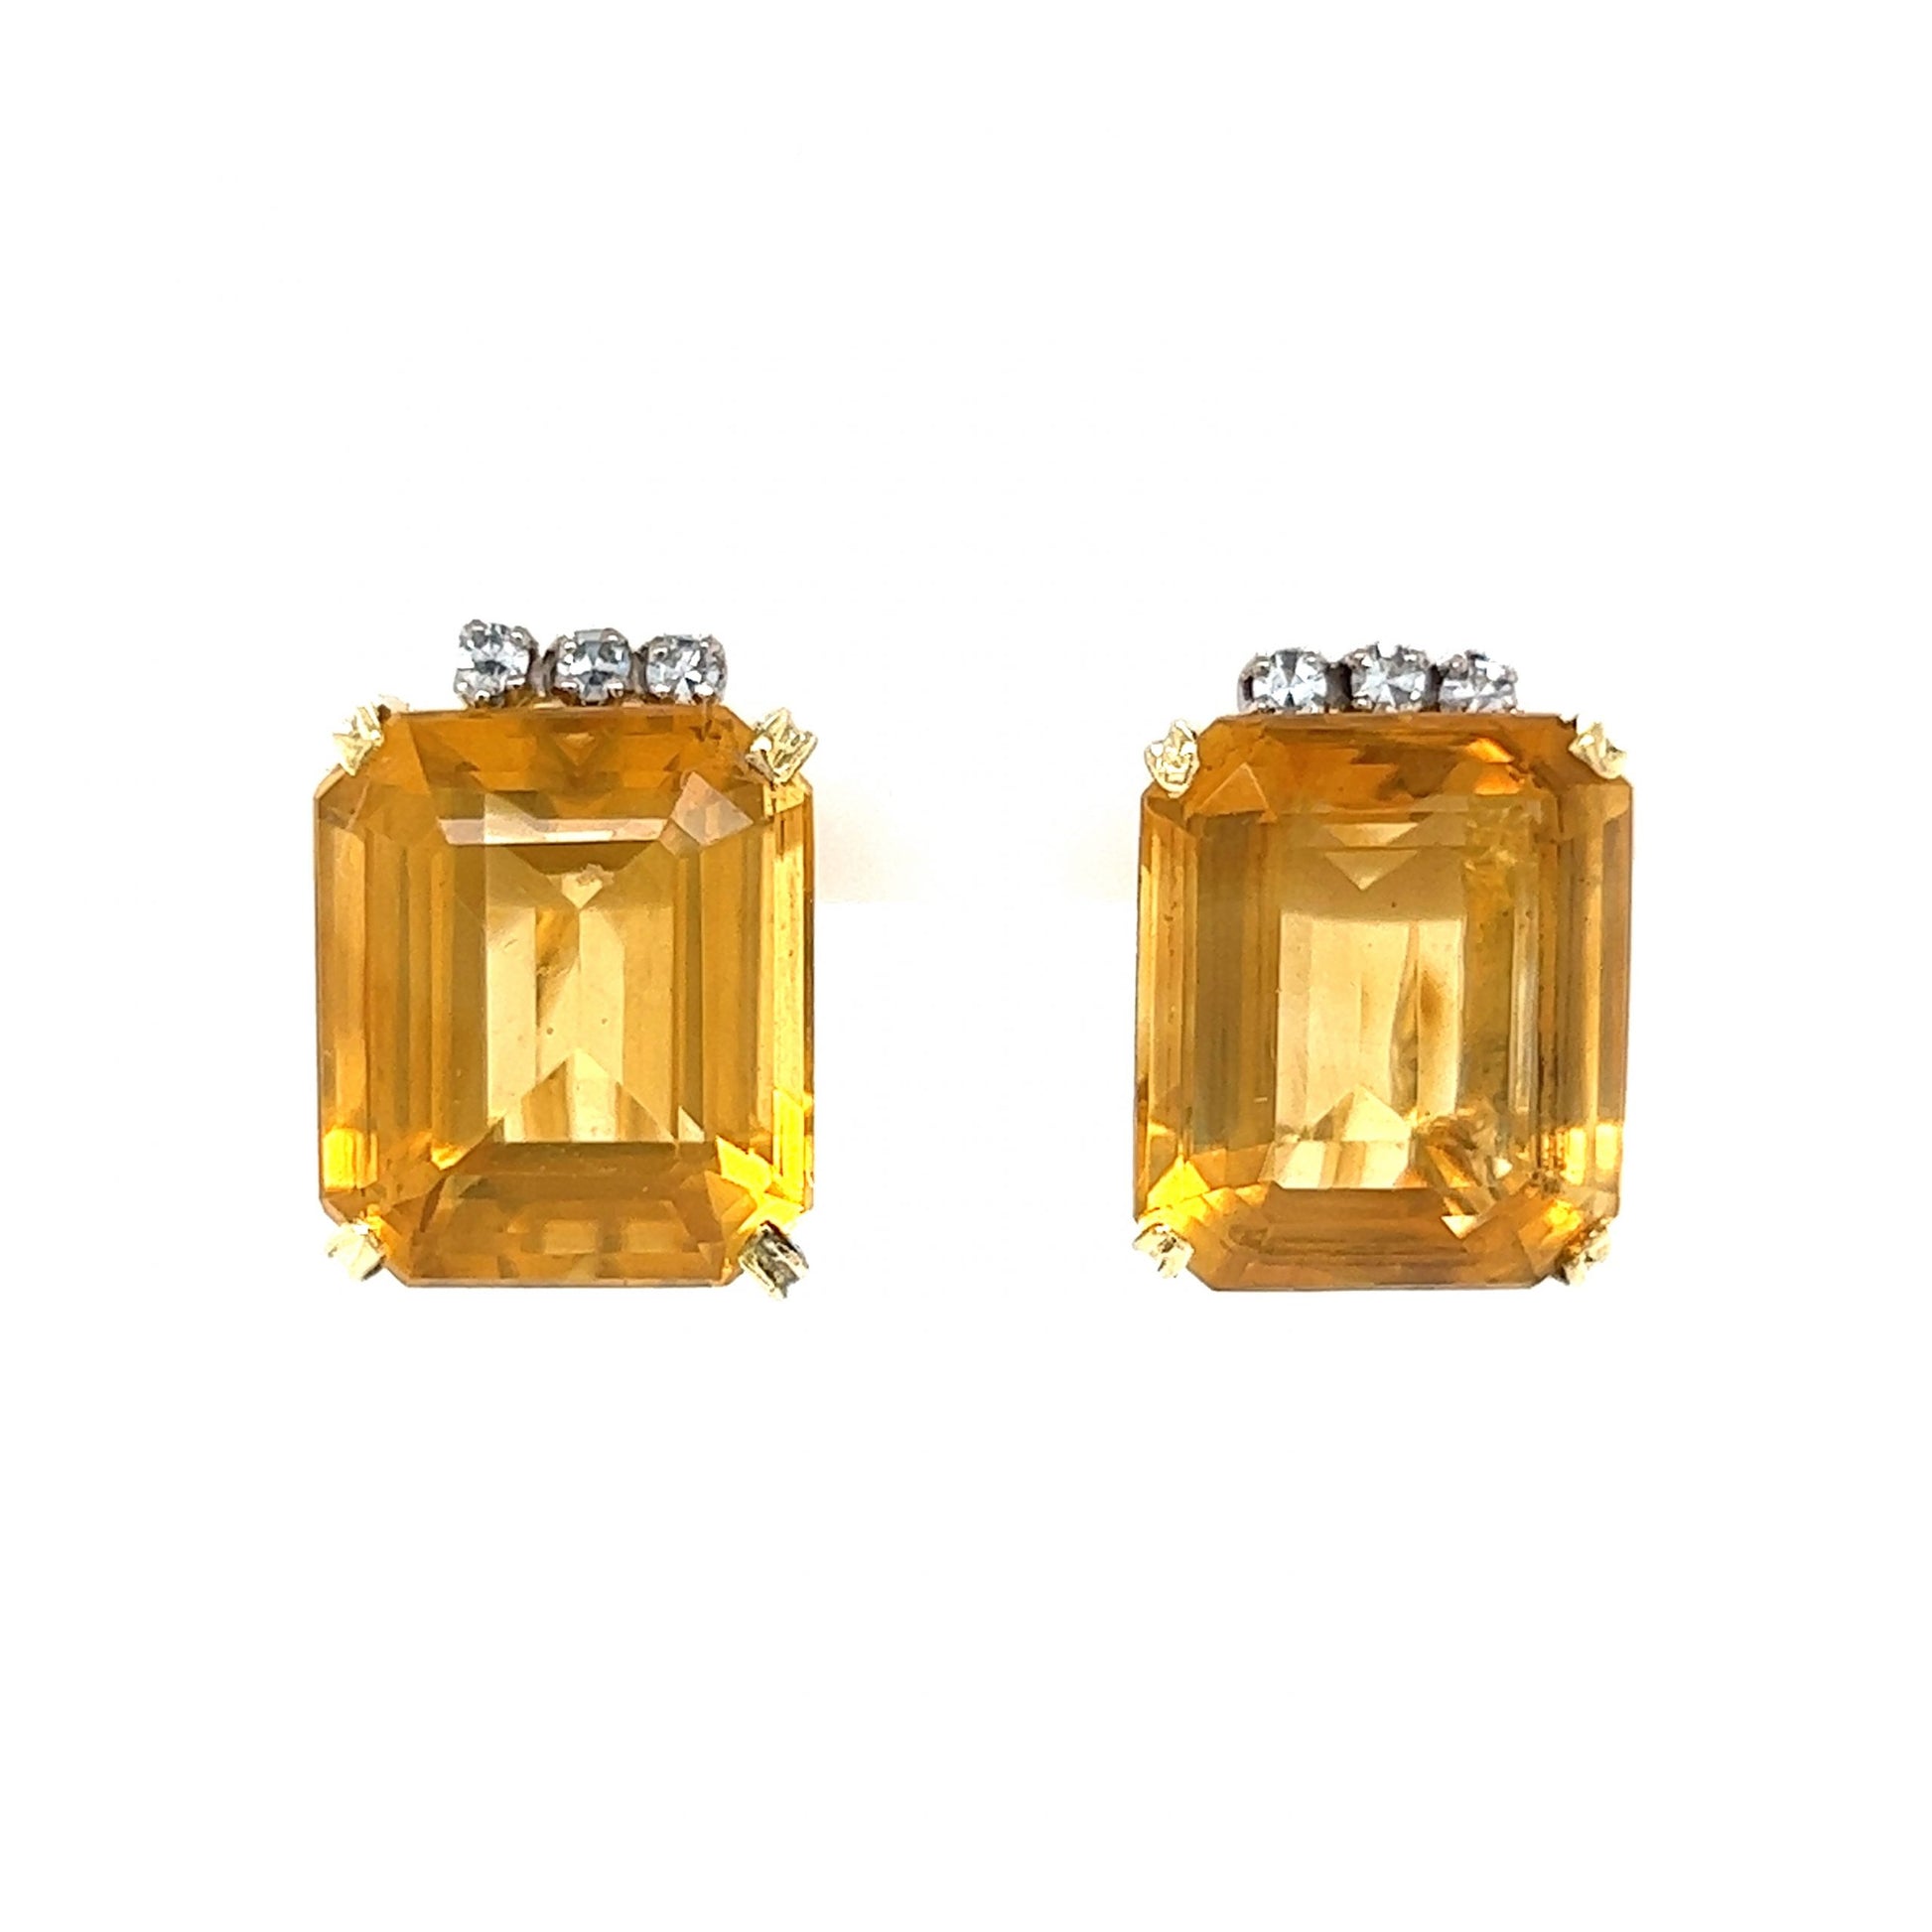 Mid-Century Citrine Stud Earrings in 14k Yellow GoldComposition: 14 Karat Yellow Gold Total Diamond Weight: .12ct Total Gram Weight: 8.10 g Inscription: 14k
      